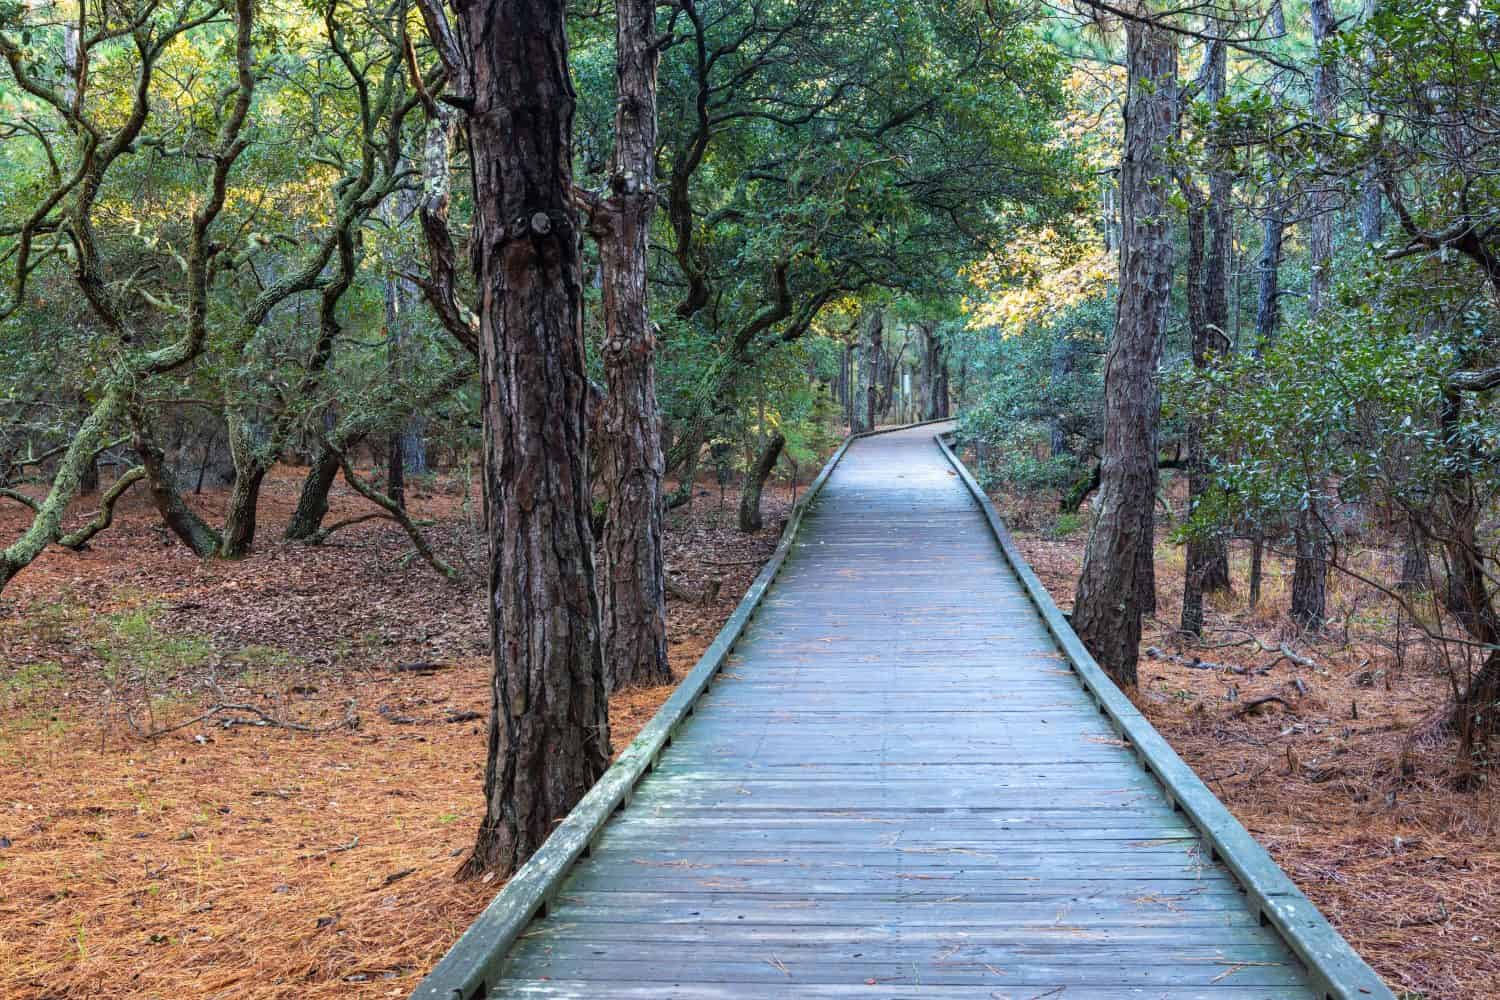 The maritime forest and boardwalk through the Currituck Banks National Estuarine Research Preserve in the Outer Banks of North Carolina.